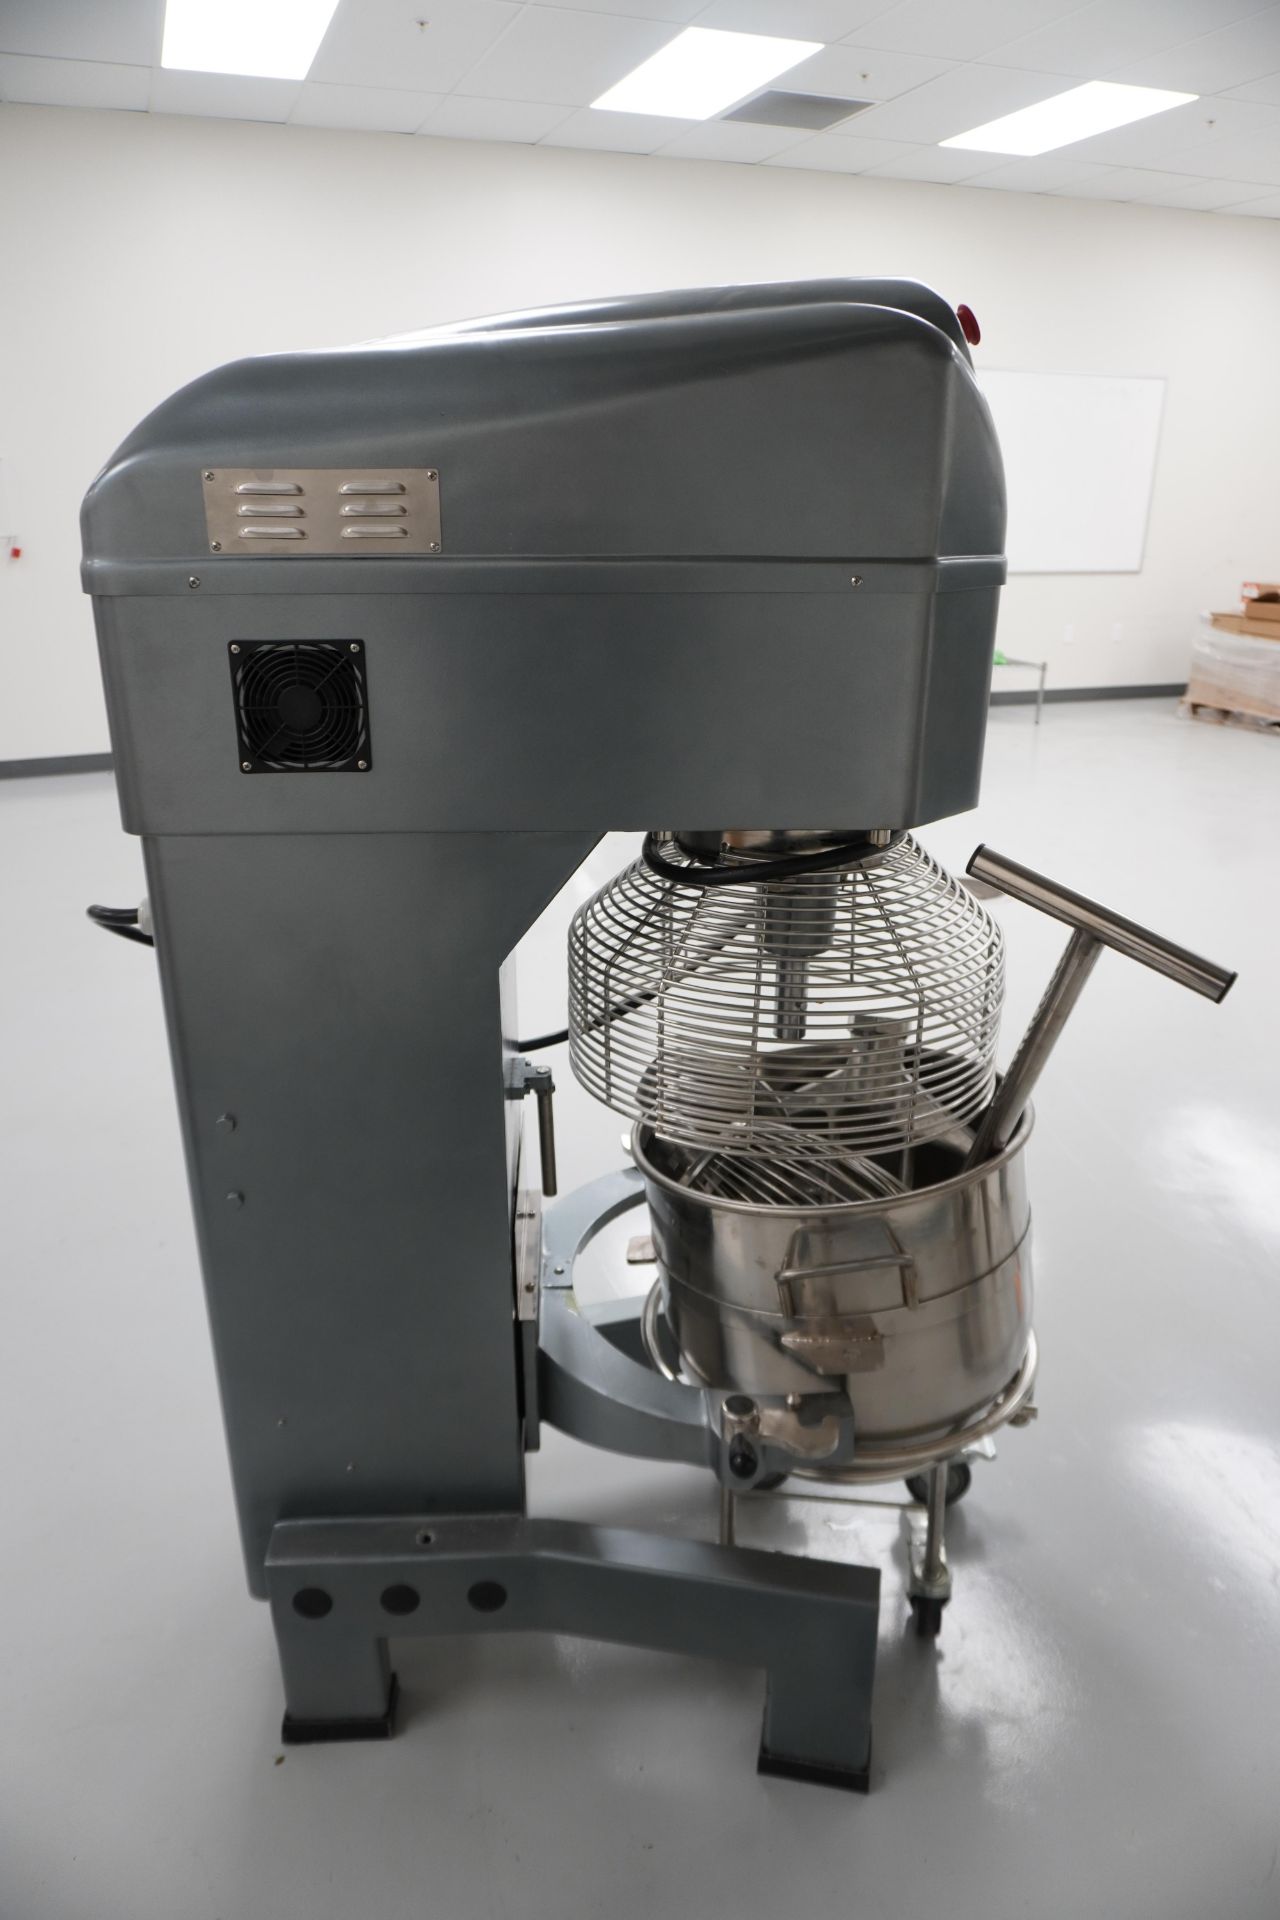 Used Avantco 60 Qt. Planetary Floor Mixer with Guard & Standard Accessories. MX60H - Image 2 of 5